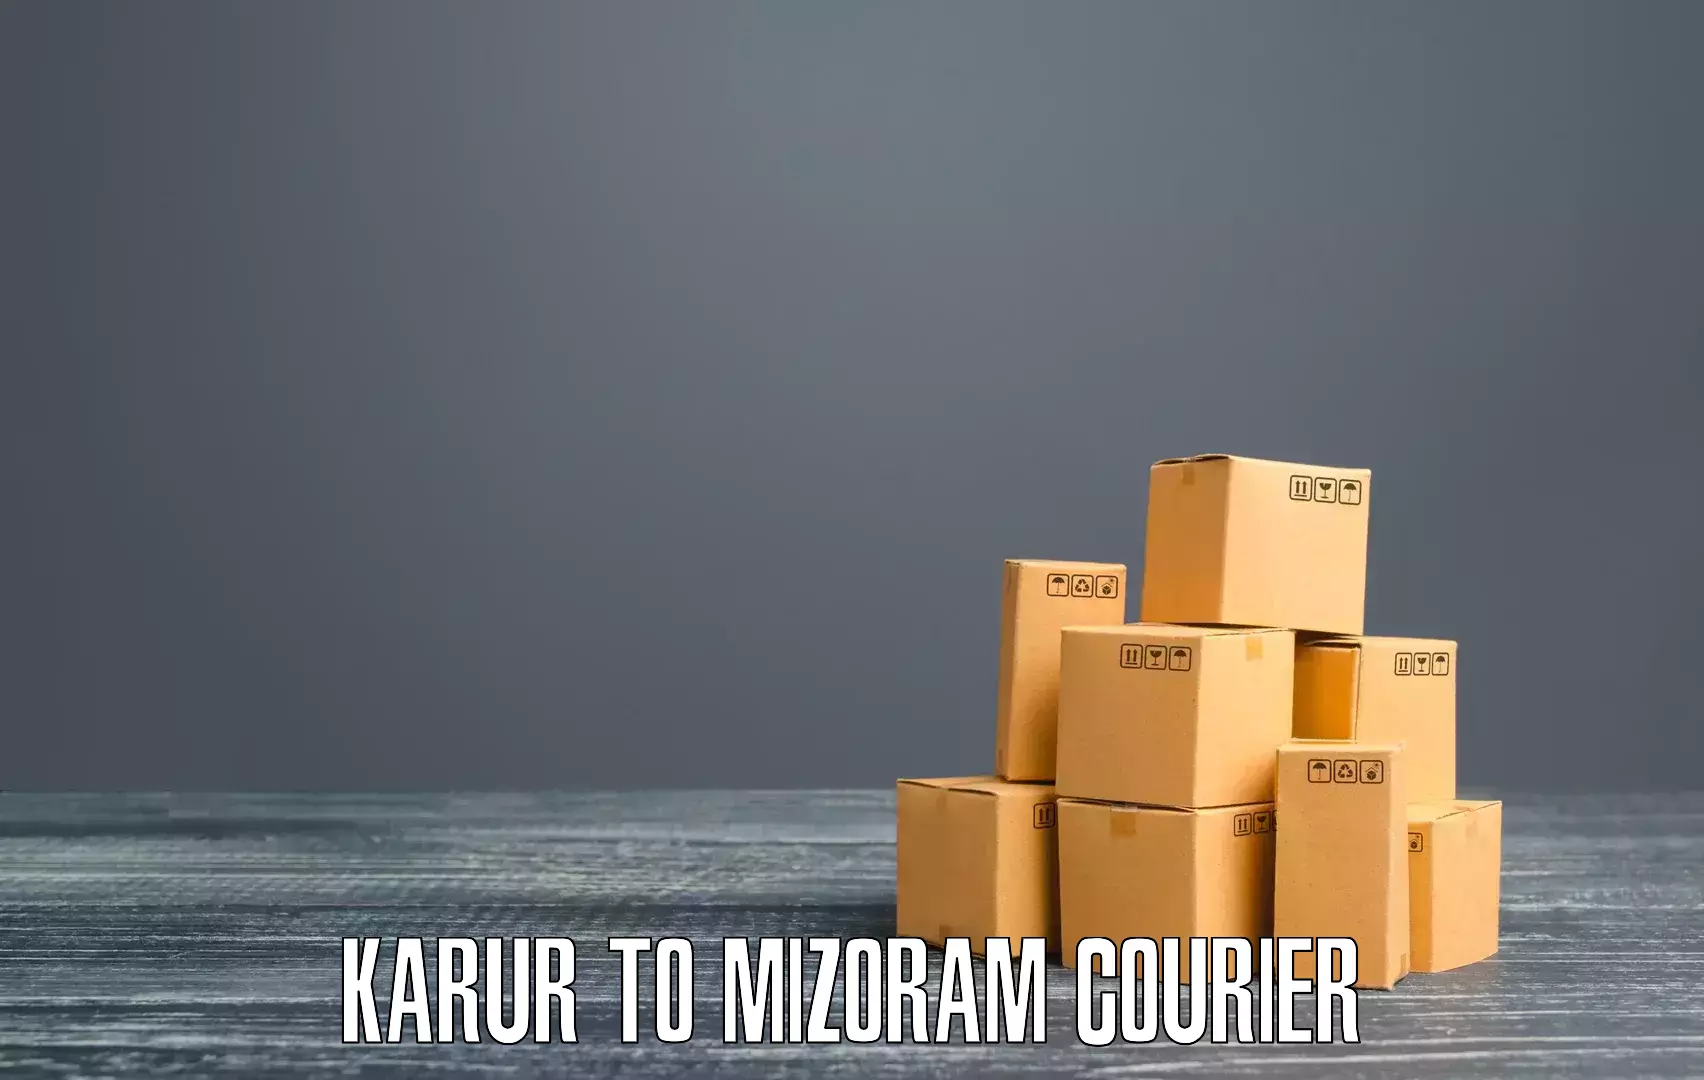 Round-the-clock parcel delivery Karur to Siaha